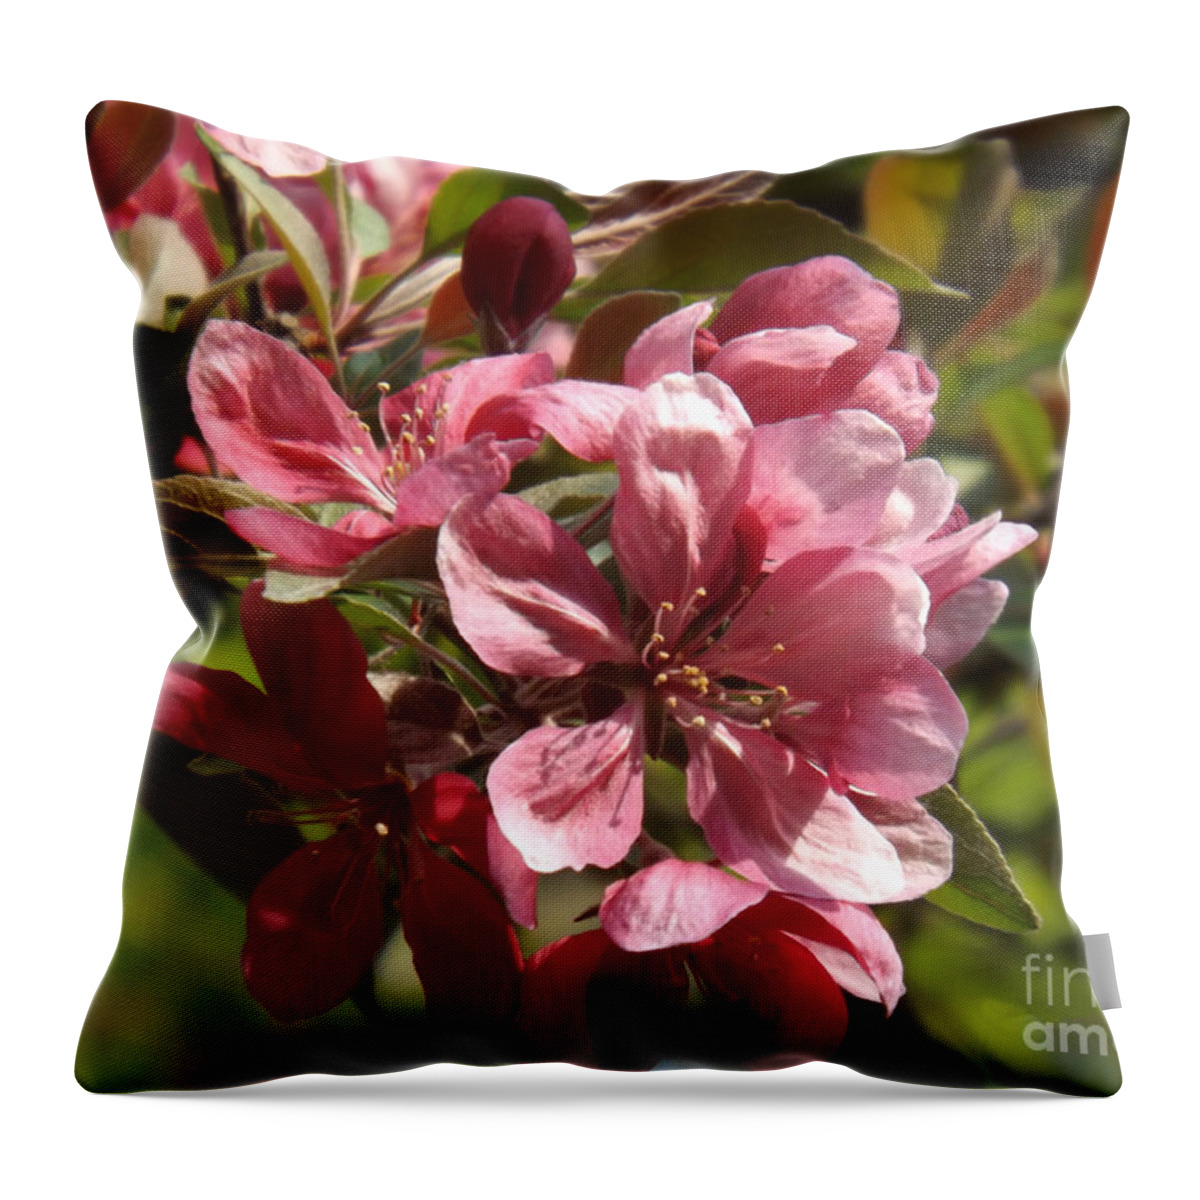 Crab Throw Pillow featuring the photograph Fragrant Crab Apple Blossoms by Brenda Brown